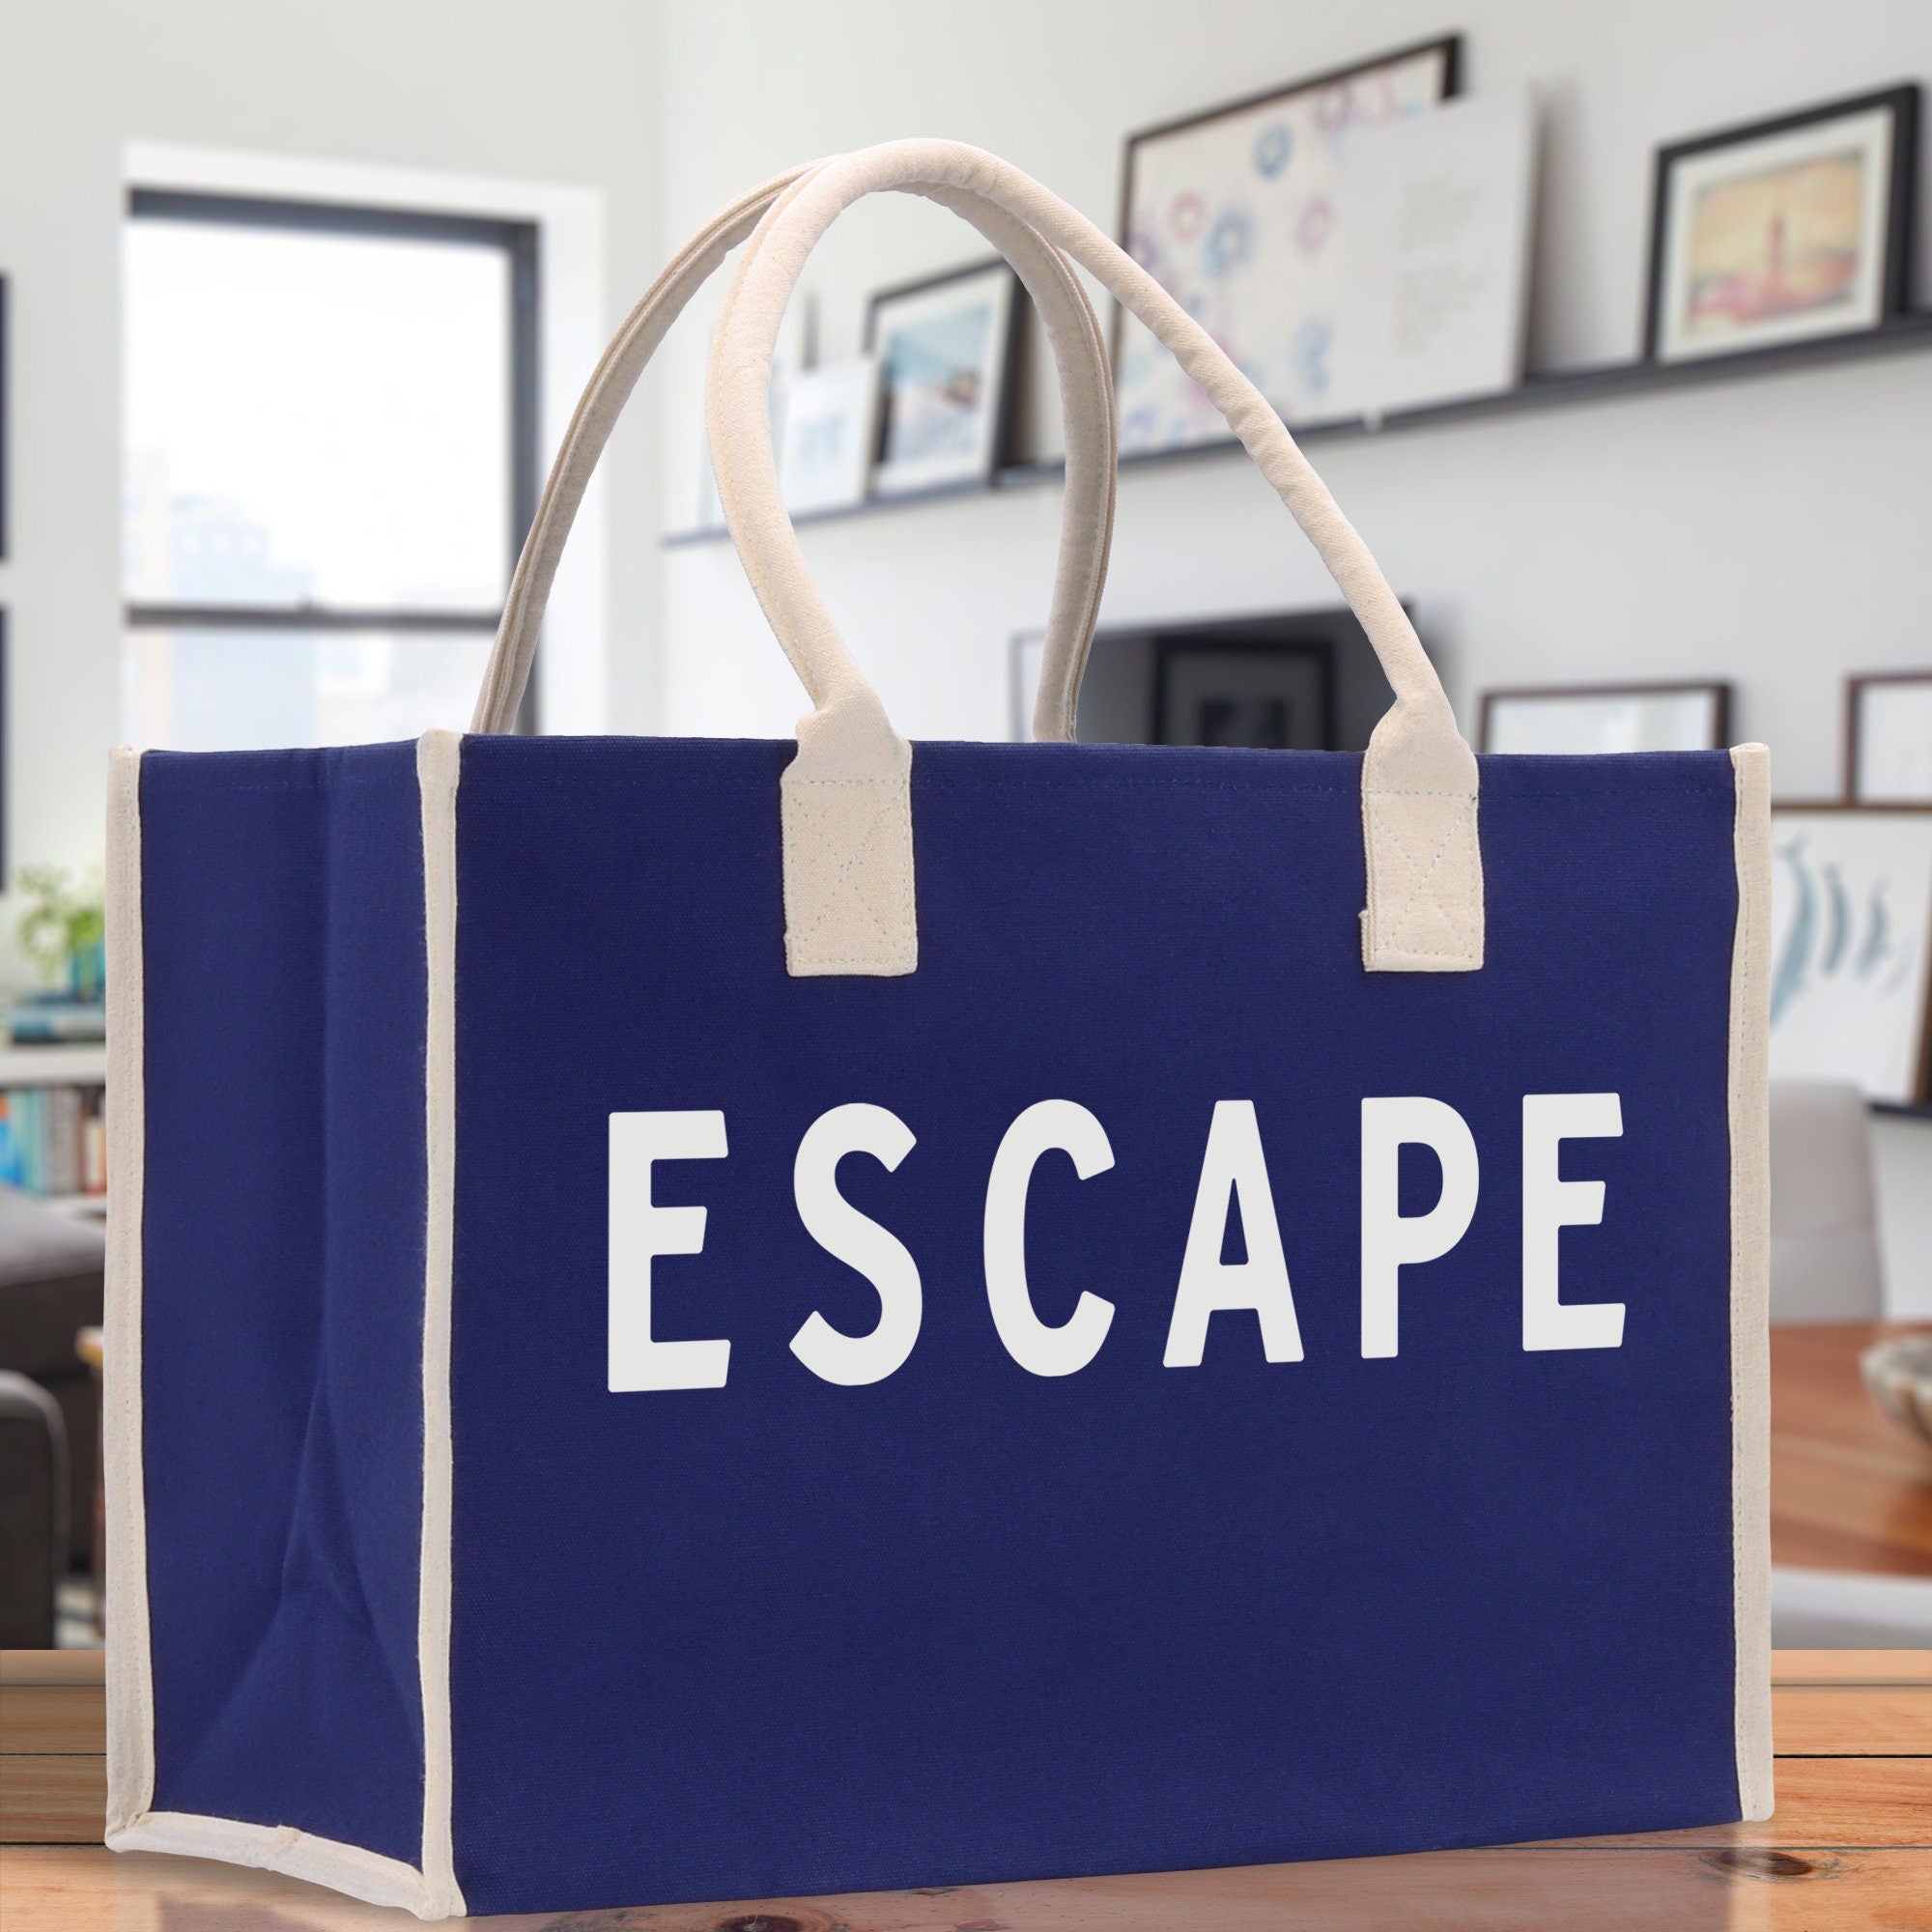 Escape Cotton Canvas Chic Beach Tote Bag Multipurpose Tote Weekender Tote Gift for Her Outdoor Tote Vacation Tote Large Beach Bag